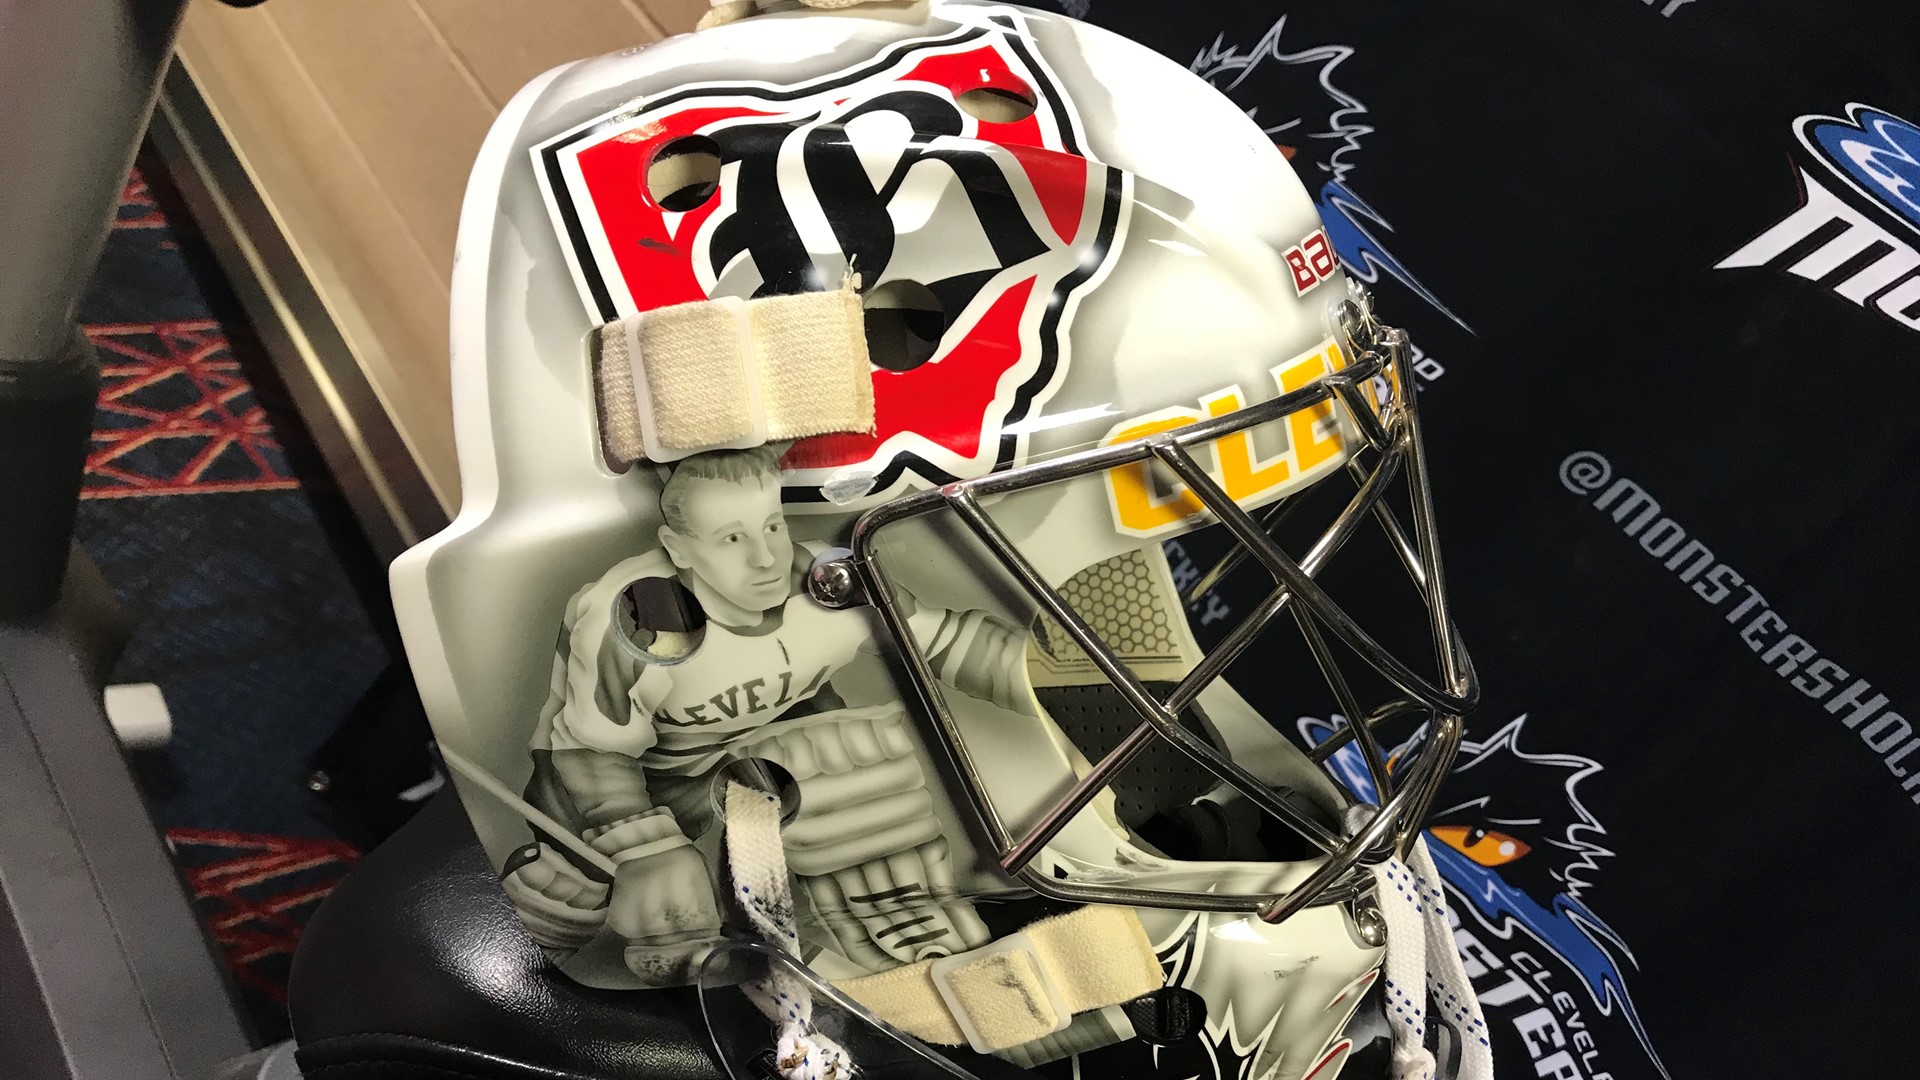 Monsters goaltender Brad Thiessen honored Cleveland’s hockey history with his unique helmet design.